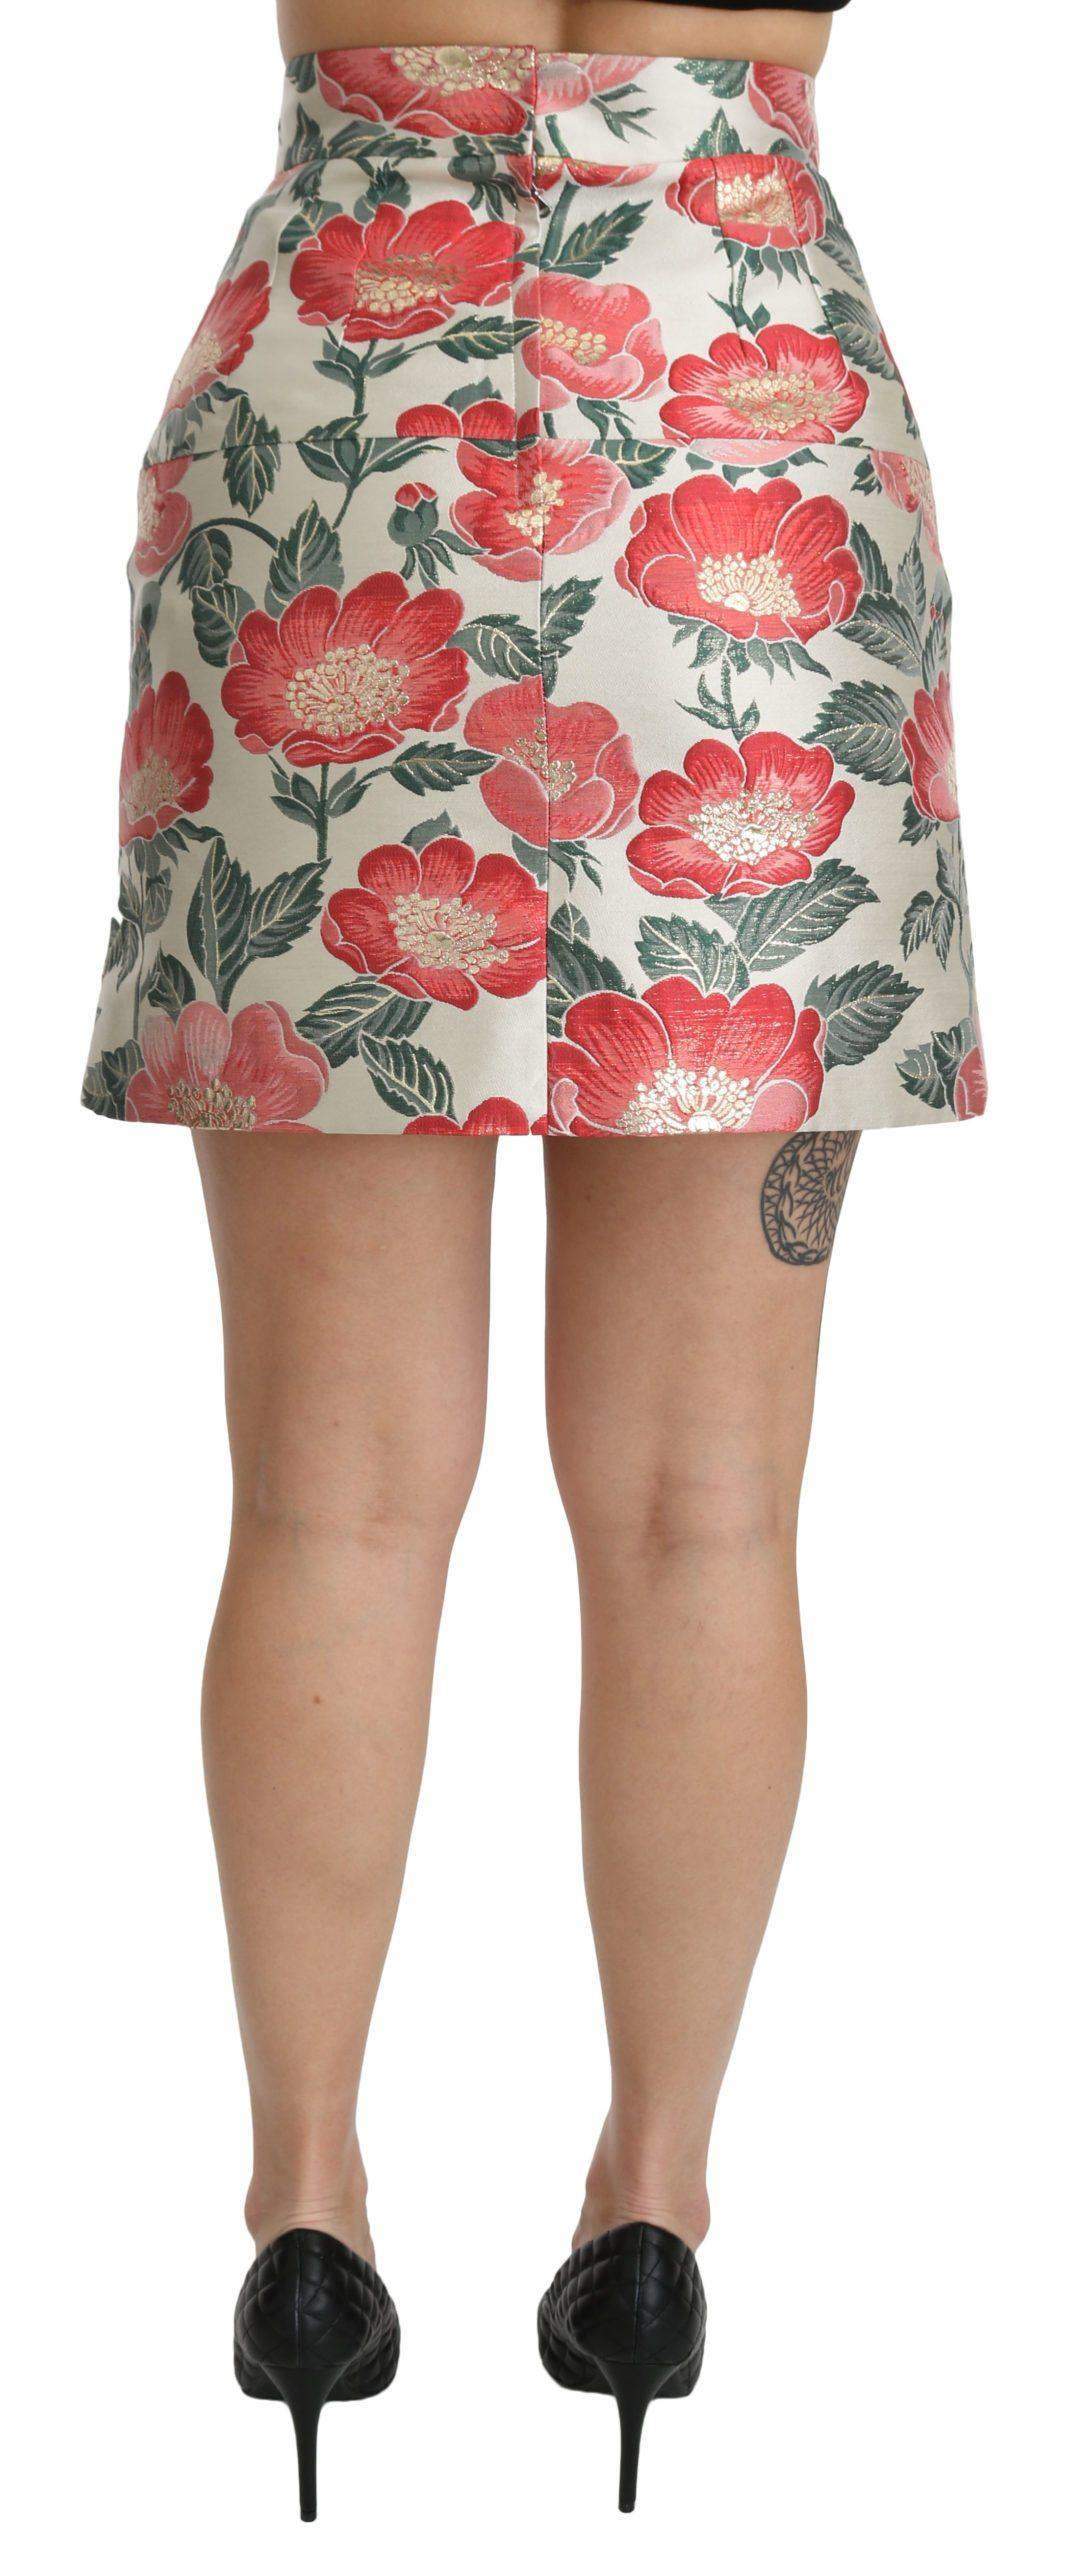 Dolce & Gabbana  White Green Red Floral High Waist Mini Skirt #women, Brand_Dolce & Gabbana, Catch, Dolce & Gabbana, feed-agegroup-adult, feed-color-white, feed-gender-female, feed-size-IT36 | XS, feed-size-IT38|XS, feed-size-IT40|S, feed-size-IT42|M, feed-size-IT44|L, feed-size-IT46|XL, feed-size-IT48|XXL, Gender_Women, IT36 | XS, IT38|XS, IT40|S, IT42|M, IT44|L, IT46|XL, IT48|XXL, Kogan, Skirts - Women - Clothing, White, Women - New Arrivals at SEYMAYKA